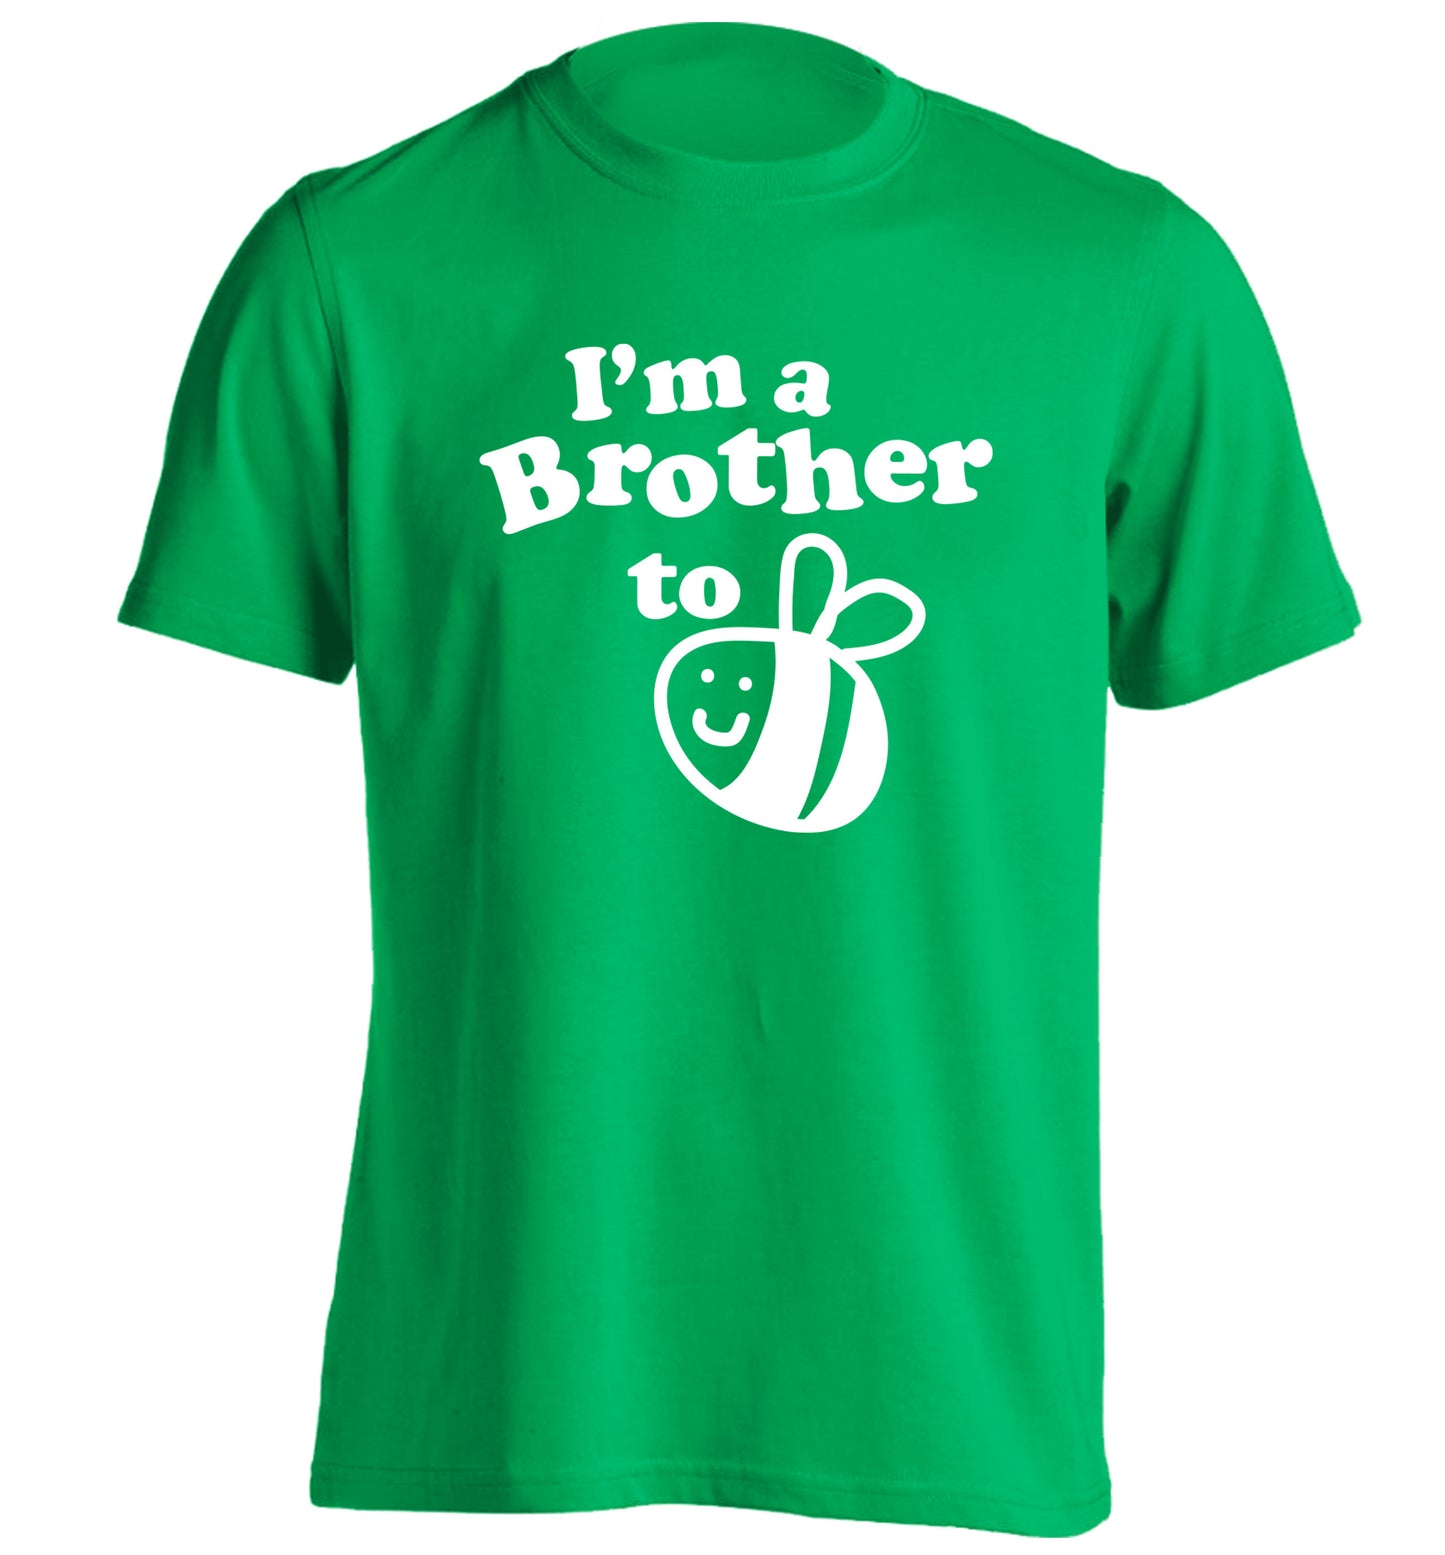 I'm a brother to be adults unisex green Tshirt 2XL